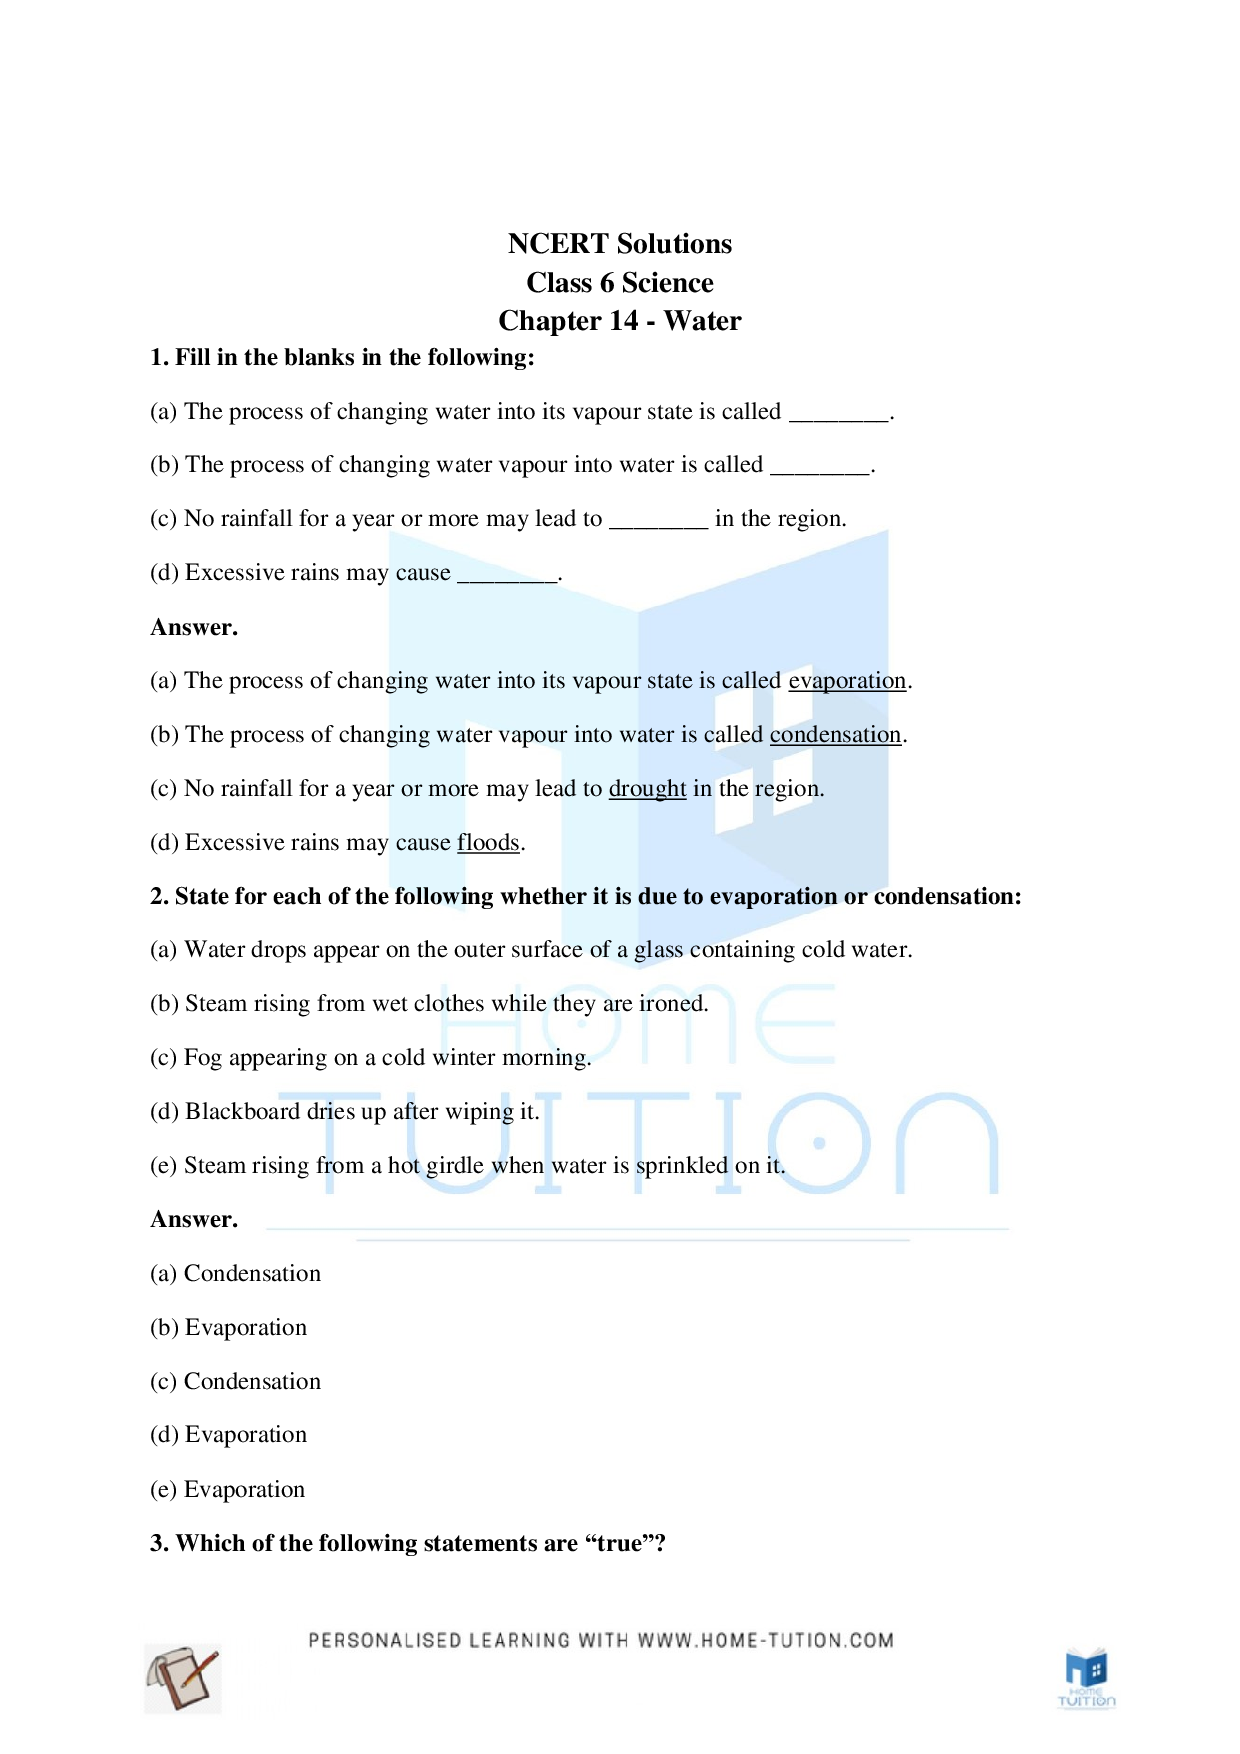 Class 6 Science Chapter 14 Water